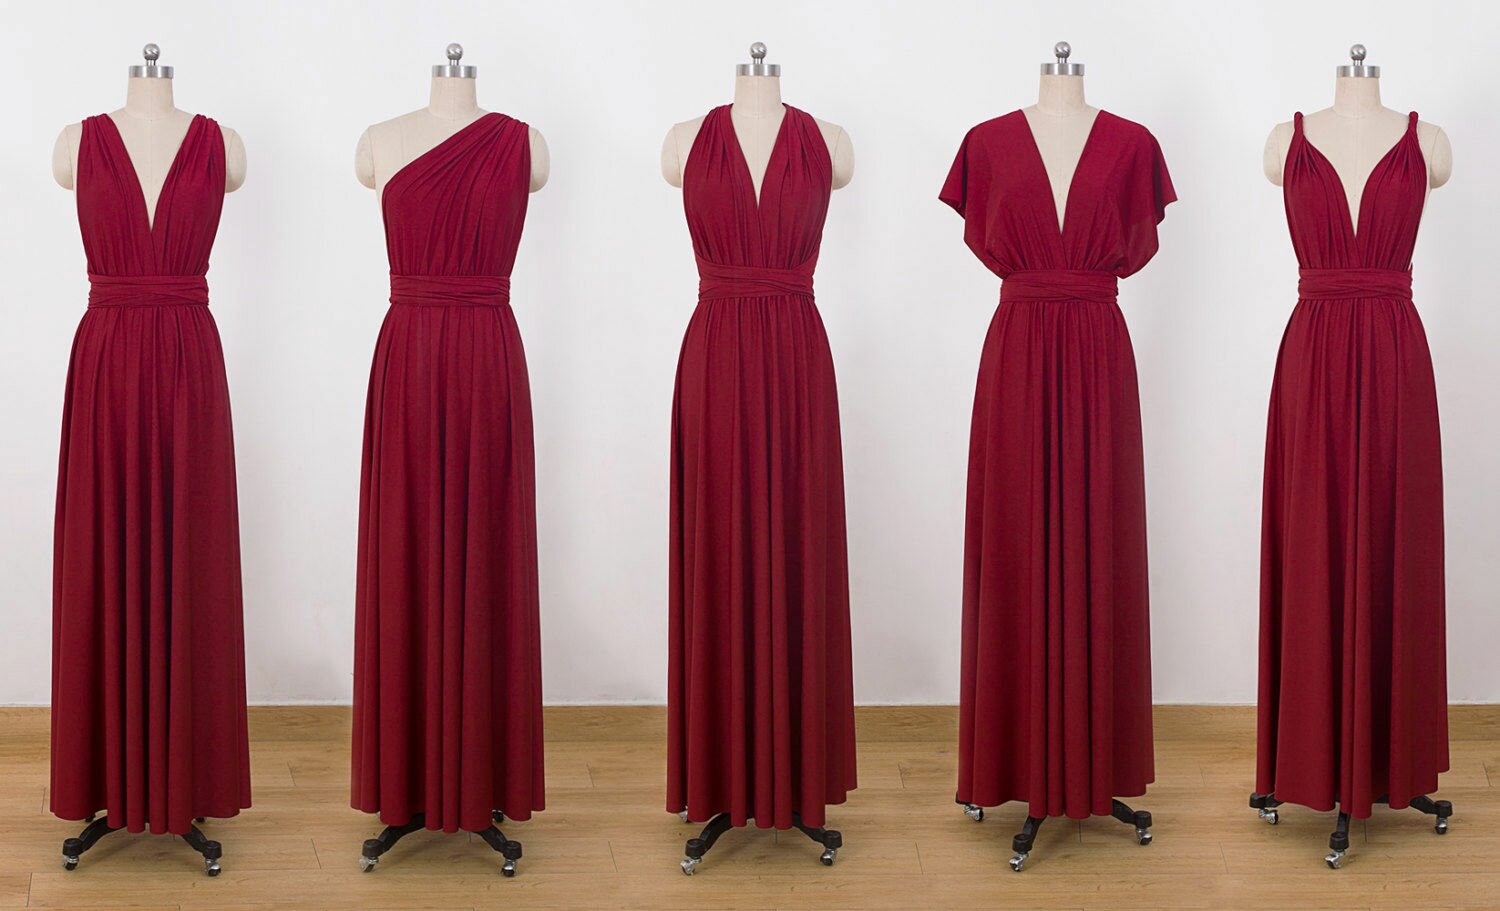 Infinity dress red infinity dress, bridesmaid red dresses, red